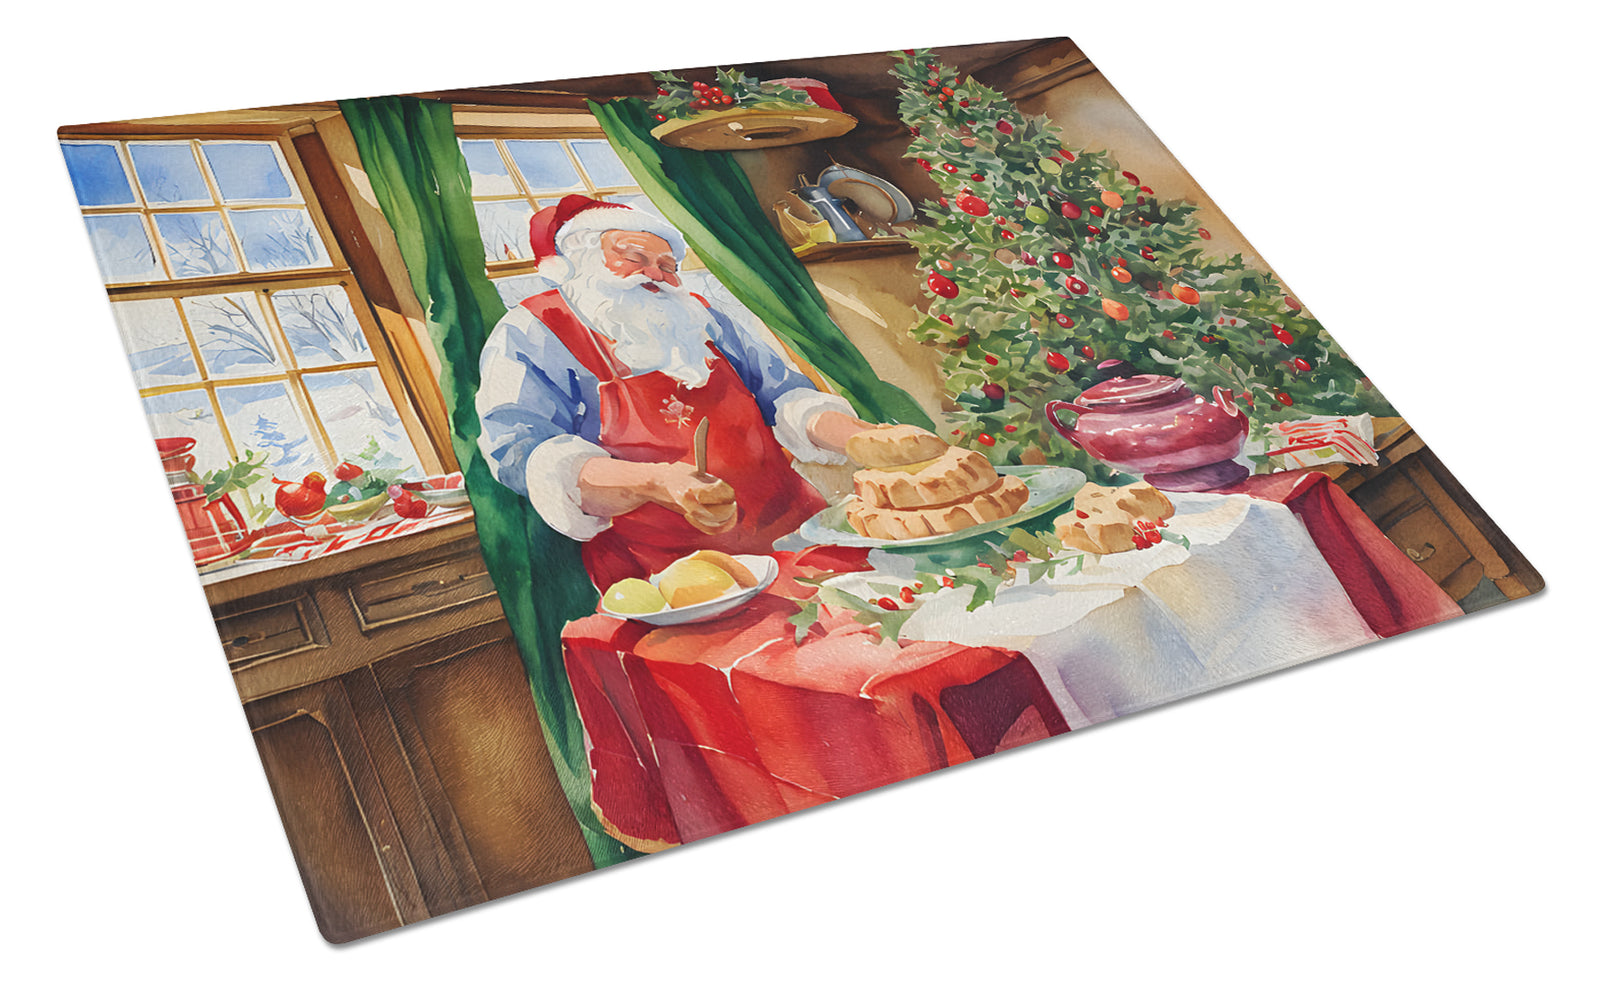 Buy this Cookies with Santa Claus Papa Noel Glass Cutting Board Large